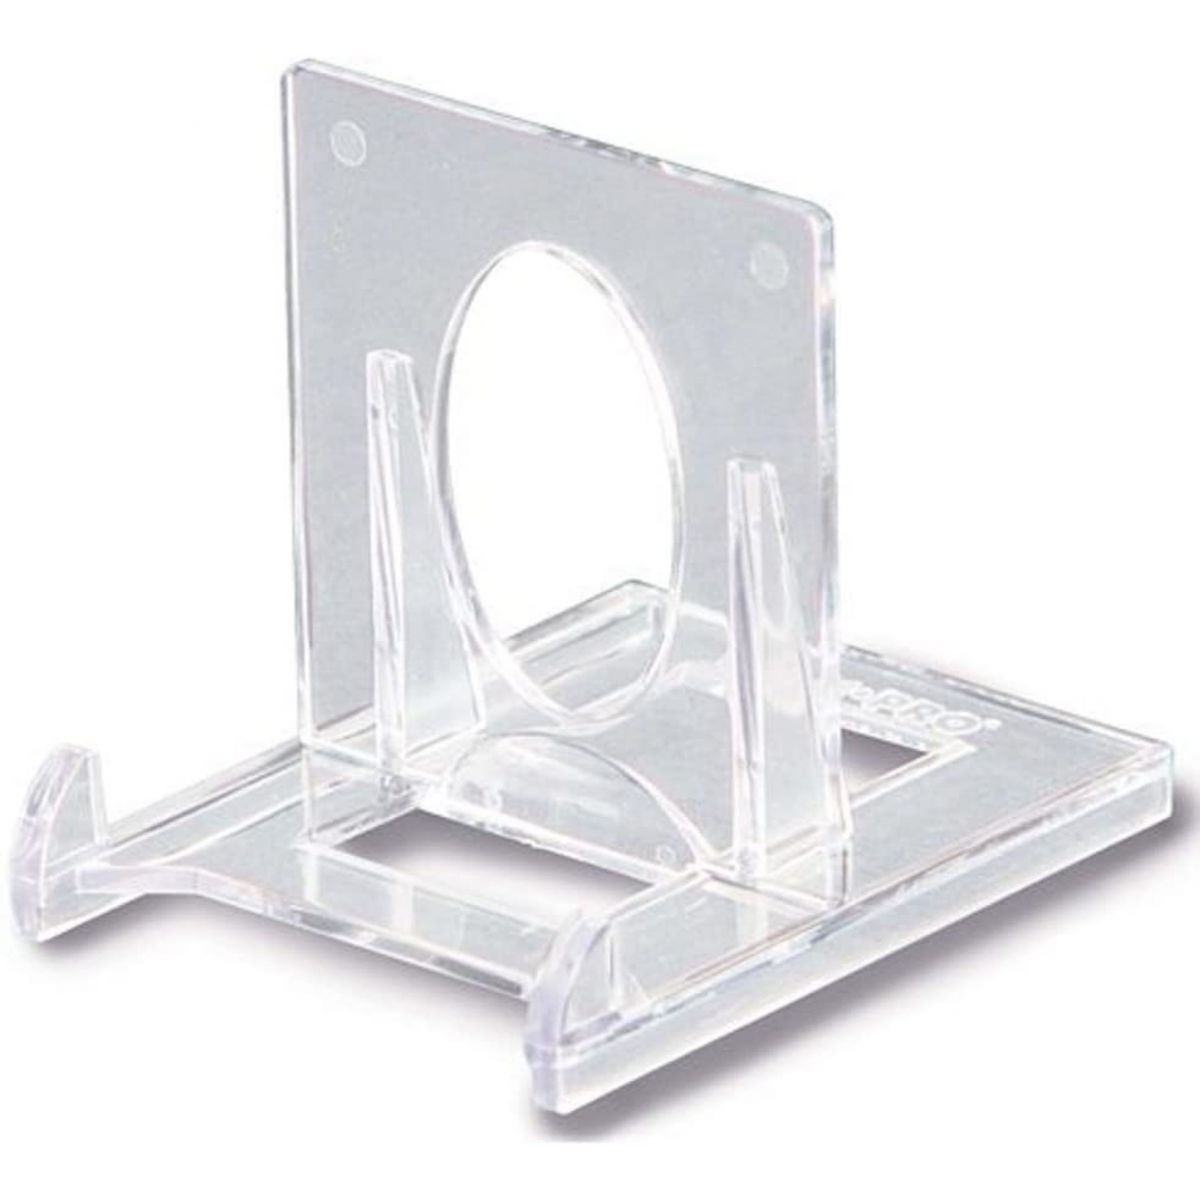 Ultra Pro - Stand - Two Piece Clear Holders - Top loader - Screw Frames - Graded Cards (5)